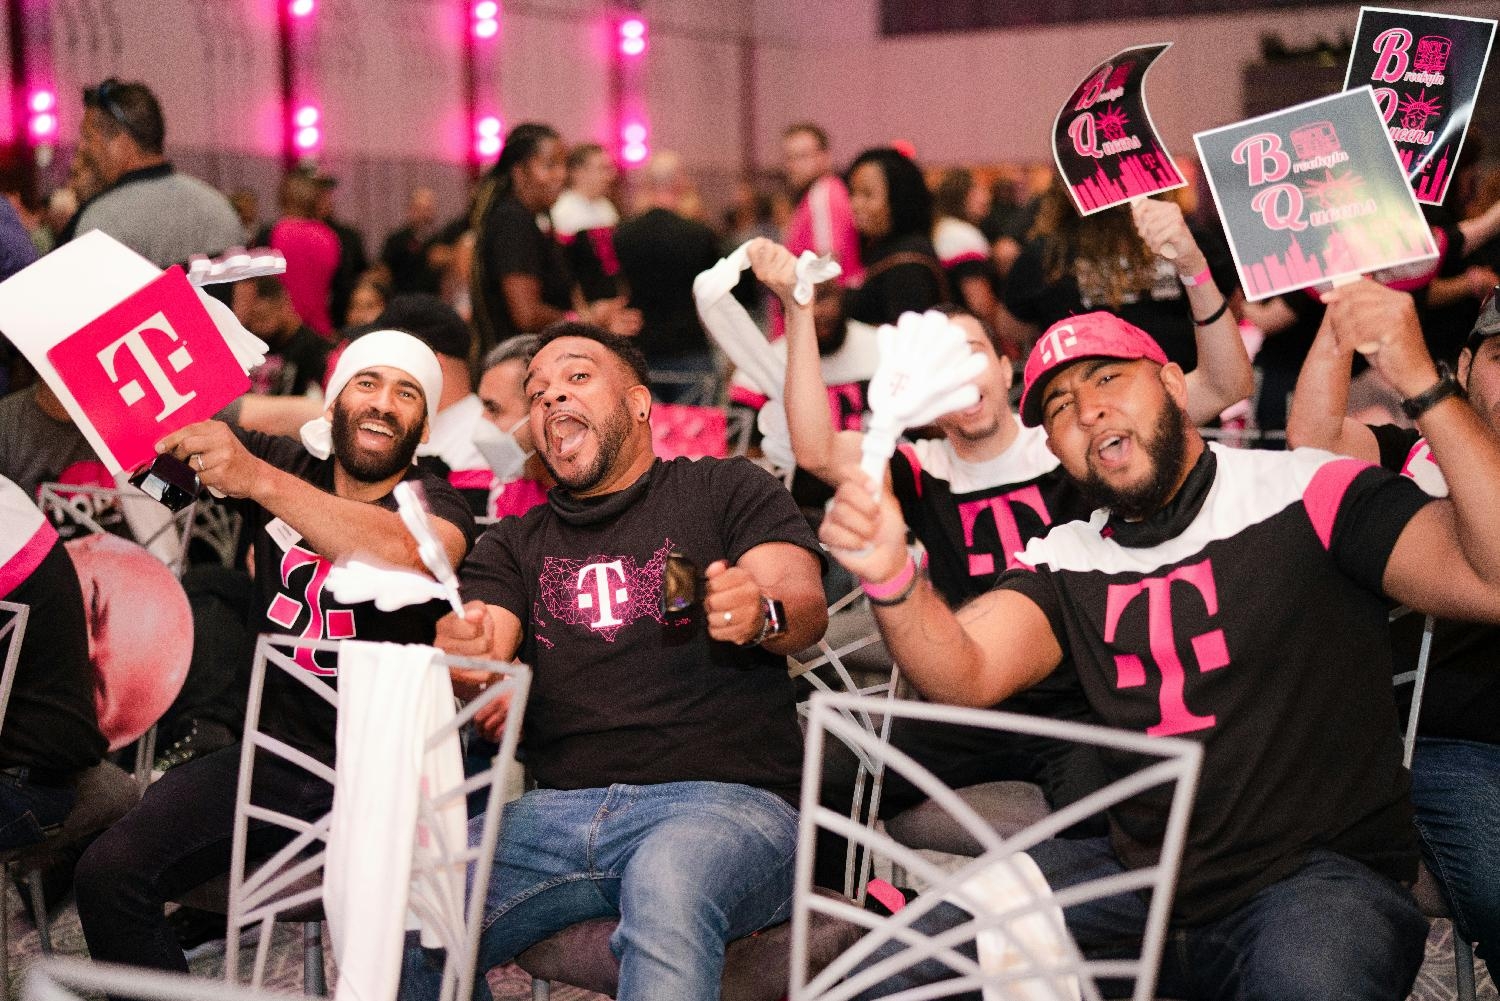 Team Magenta shows up and shows out with customary swag to greet visiting senior leaders at a New York Town Hall.